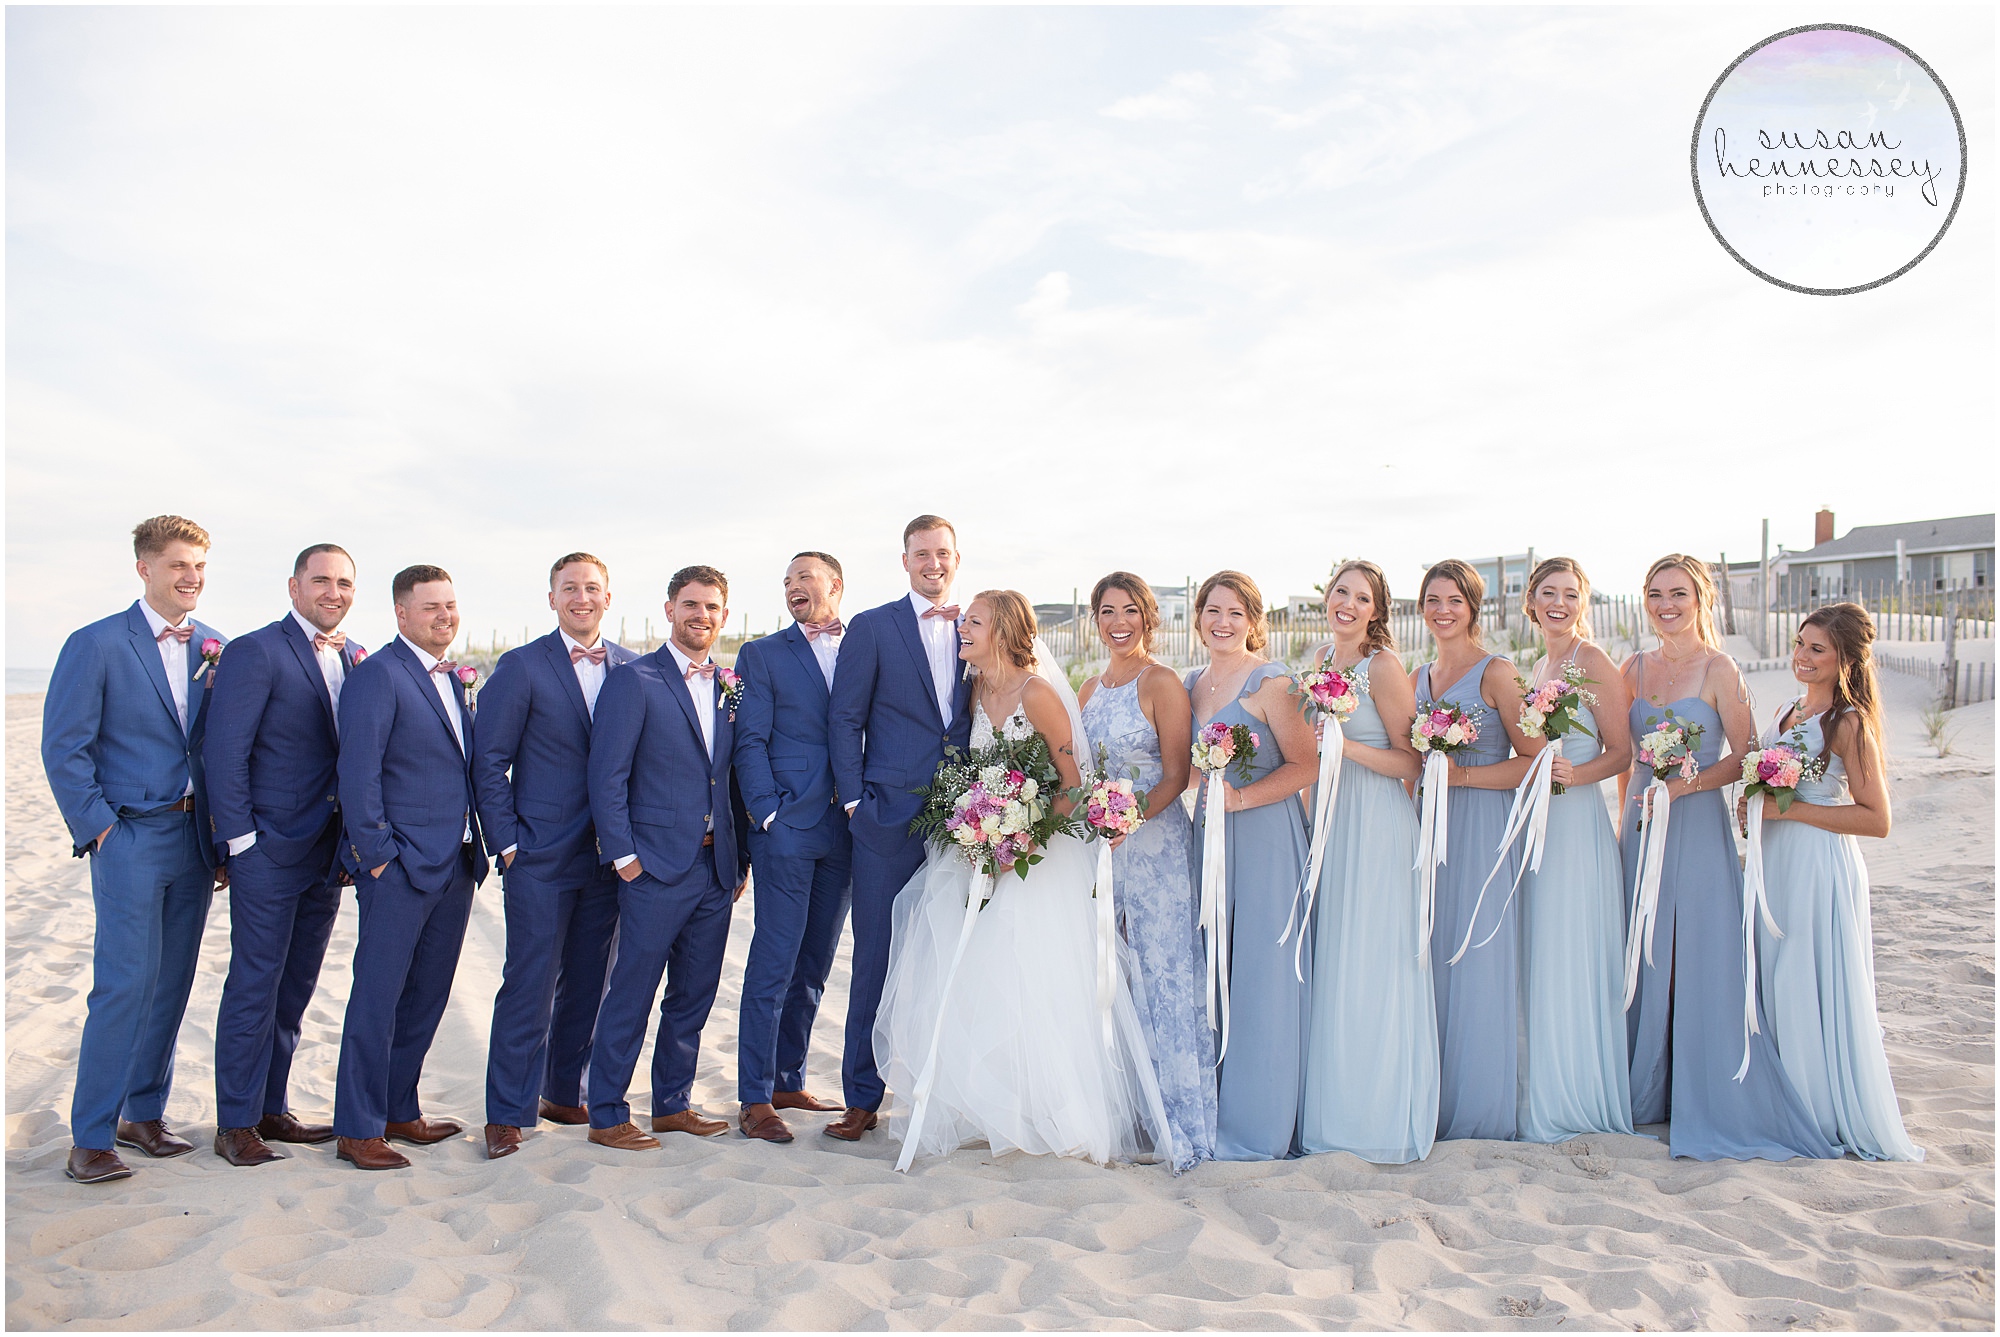 Susan Hennessey Photography Best of 2020 Weddings - LBI Microwedding bridal party